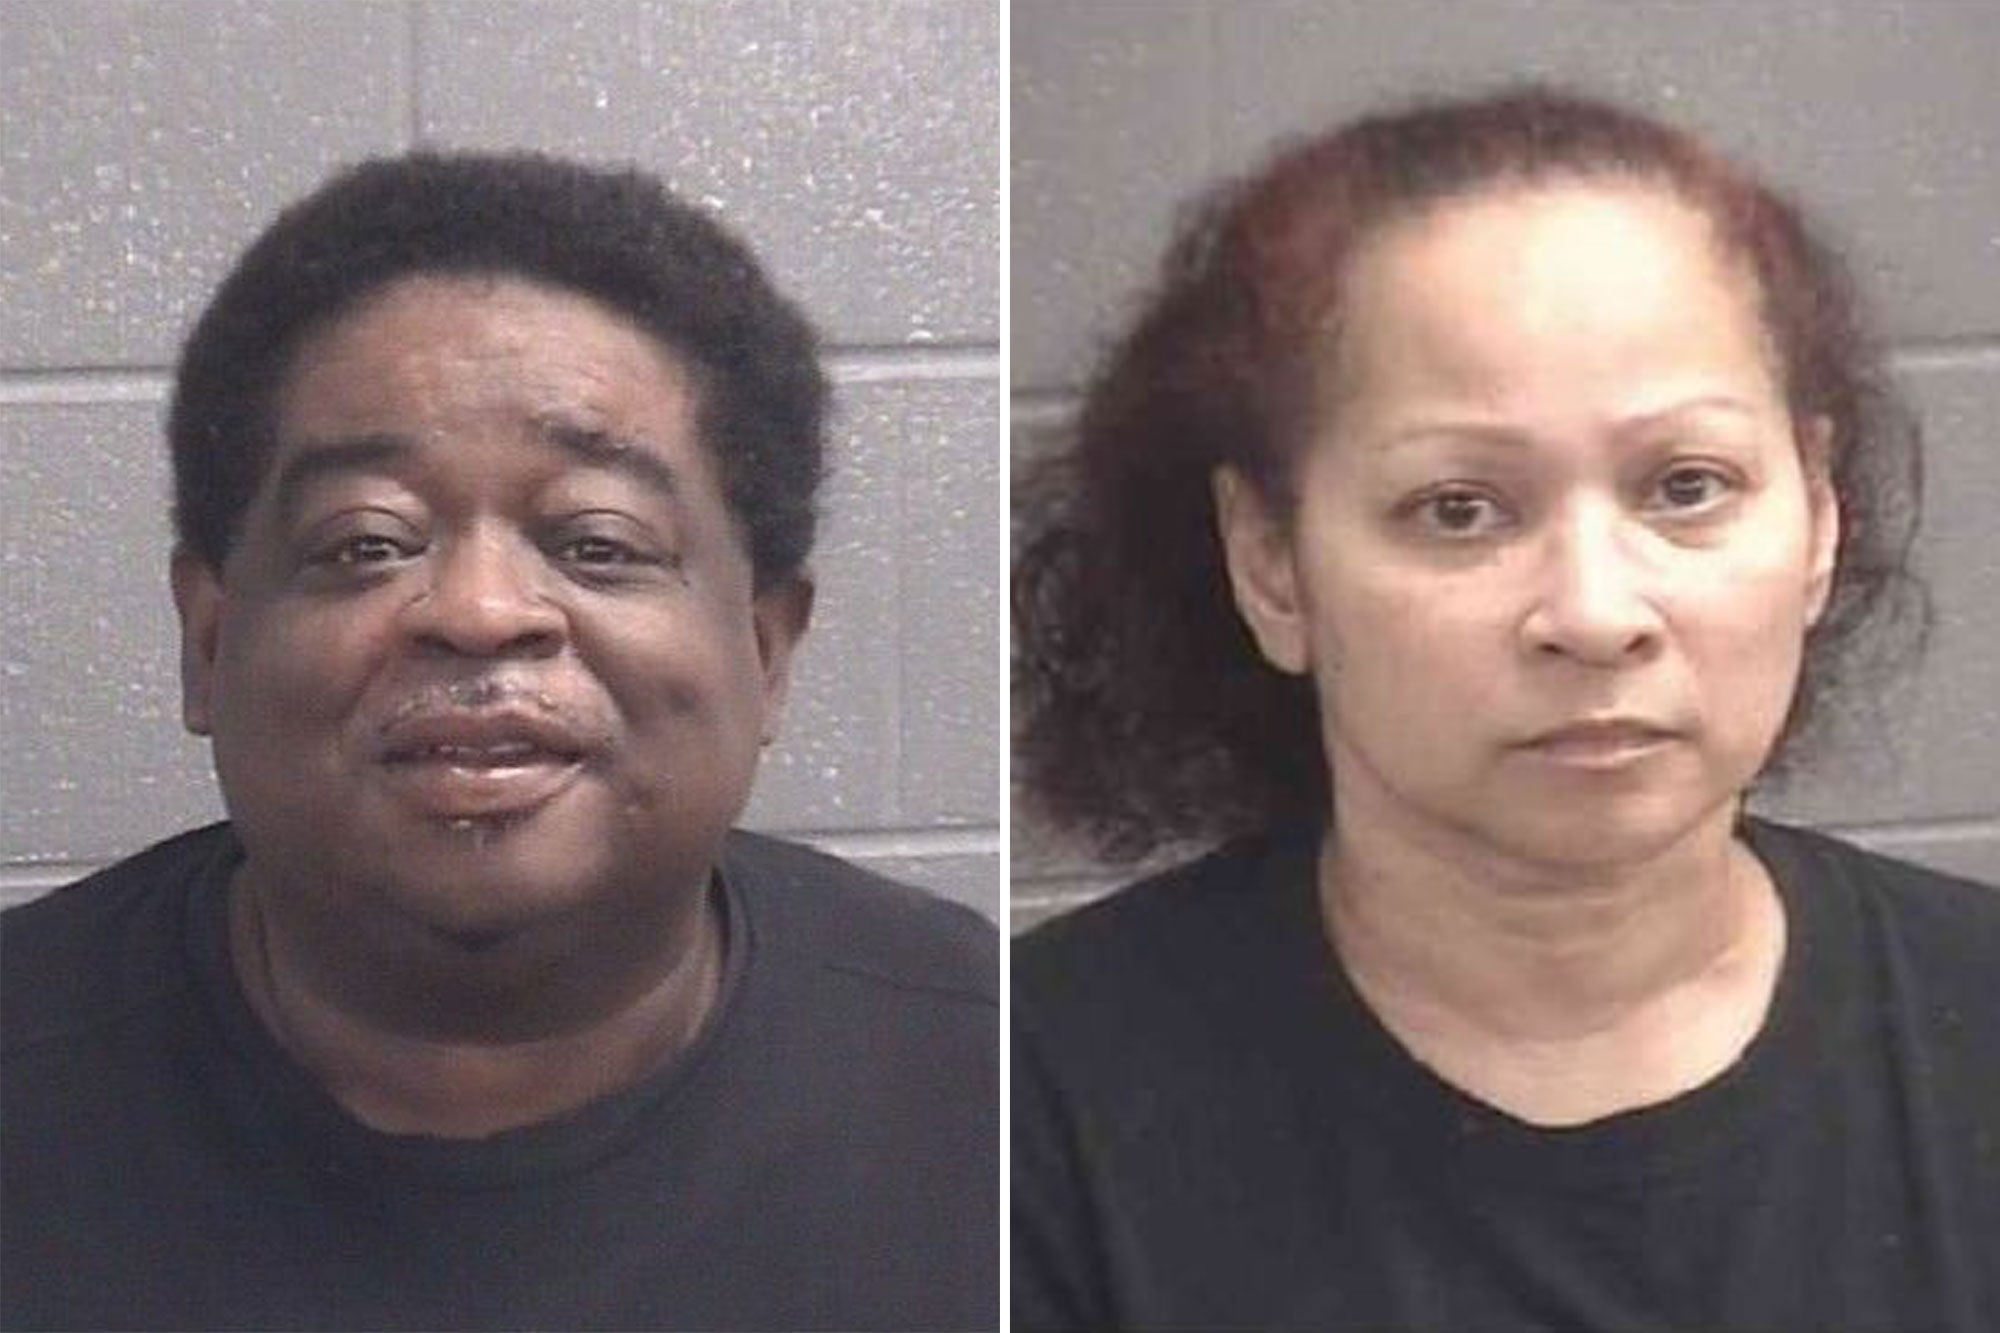 Georgia Pastor and his wife are accused of false imprisonment after at least 8 people were found in their basement thumbnail